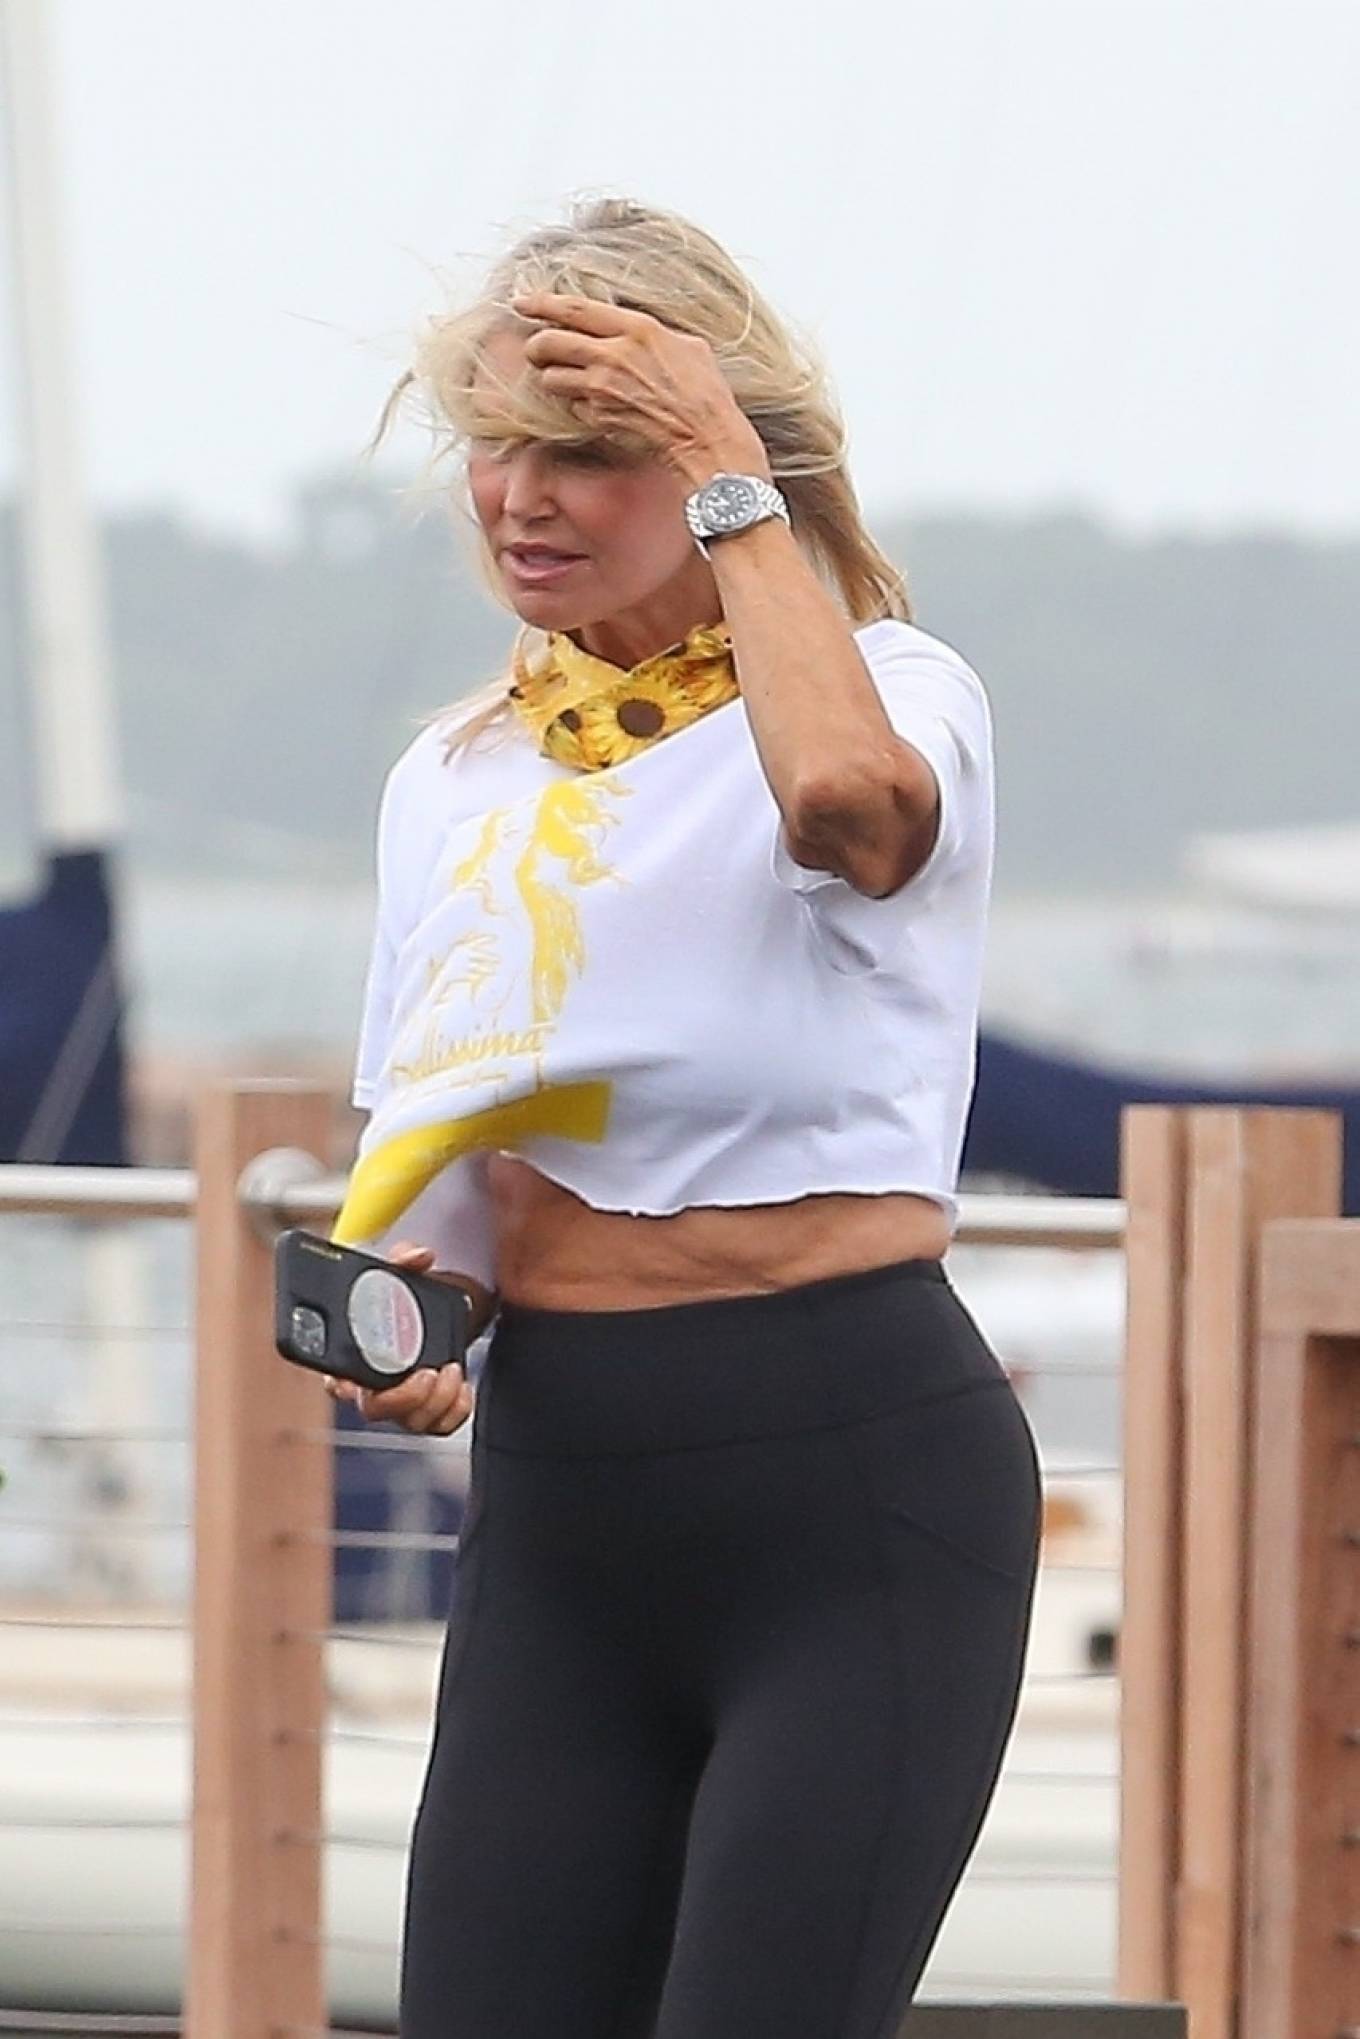 Christie Brinkley – Capturing with phone Tropical Storm Isaias approaching The Hamptons